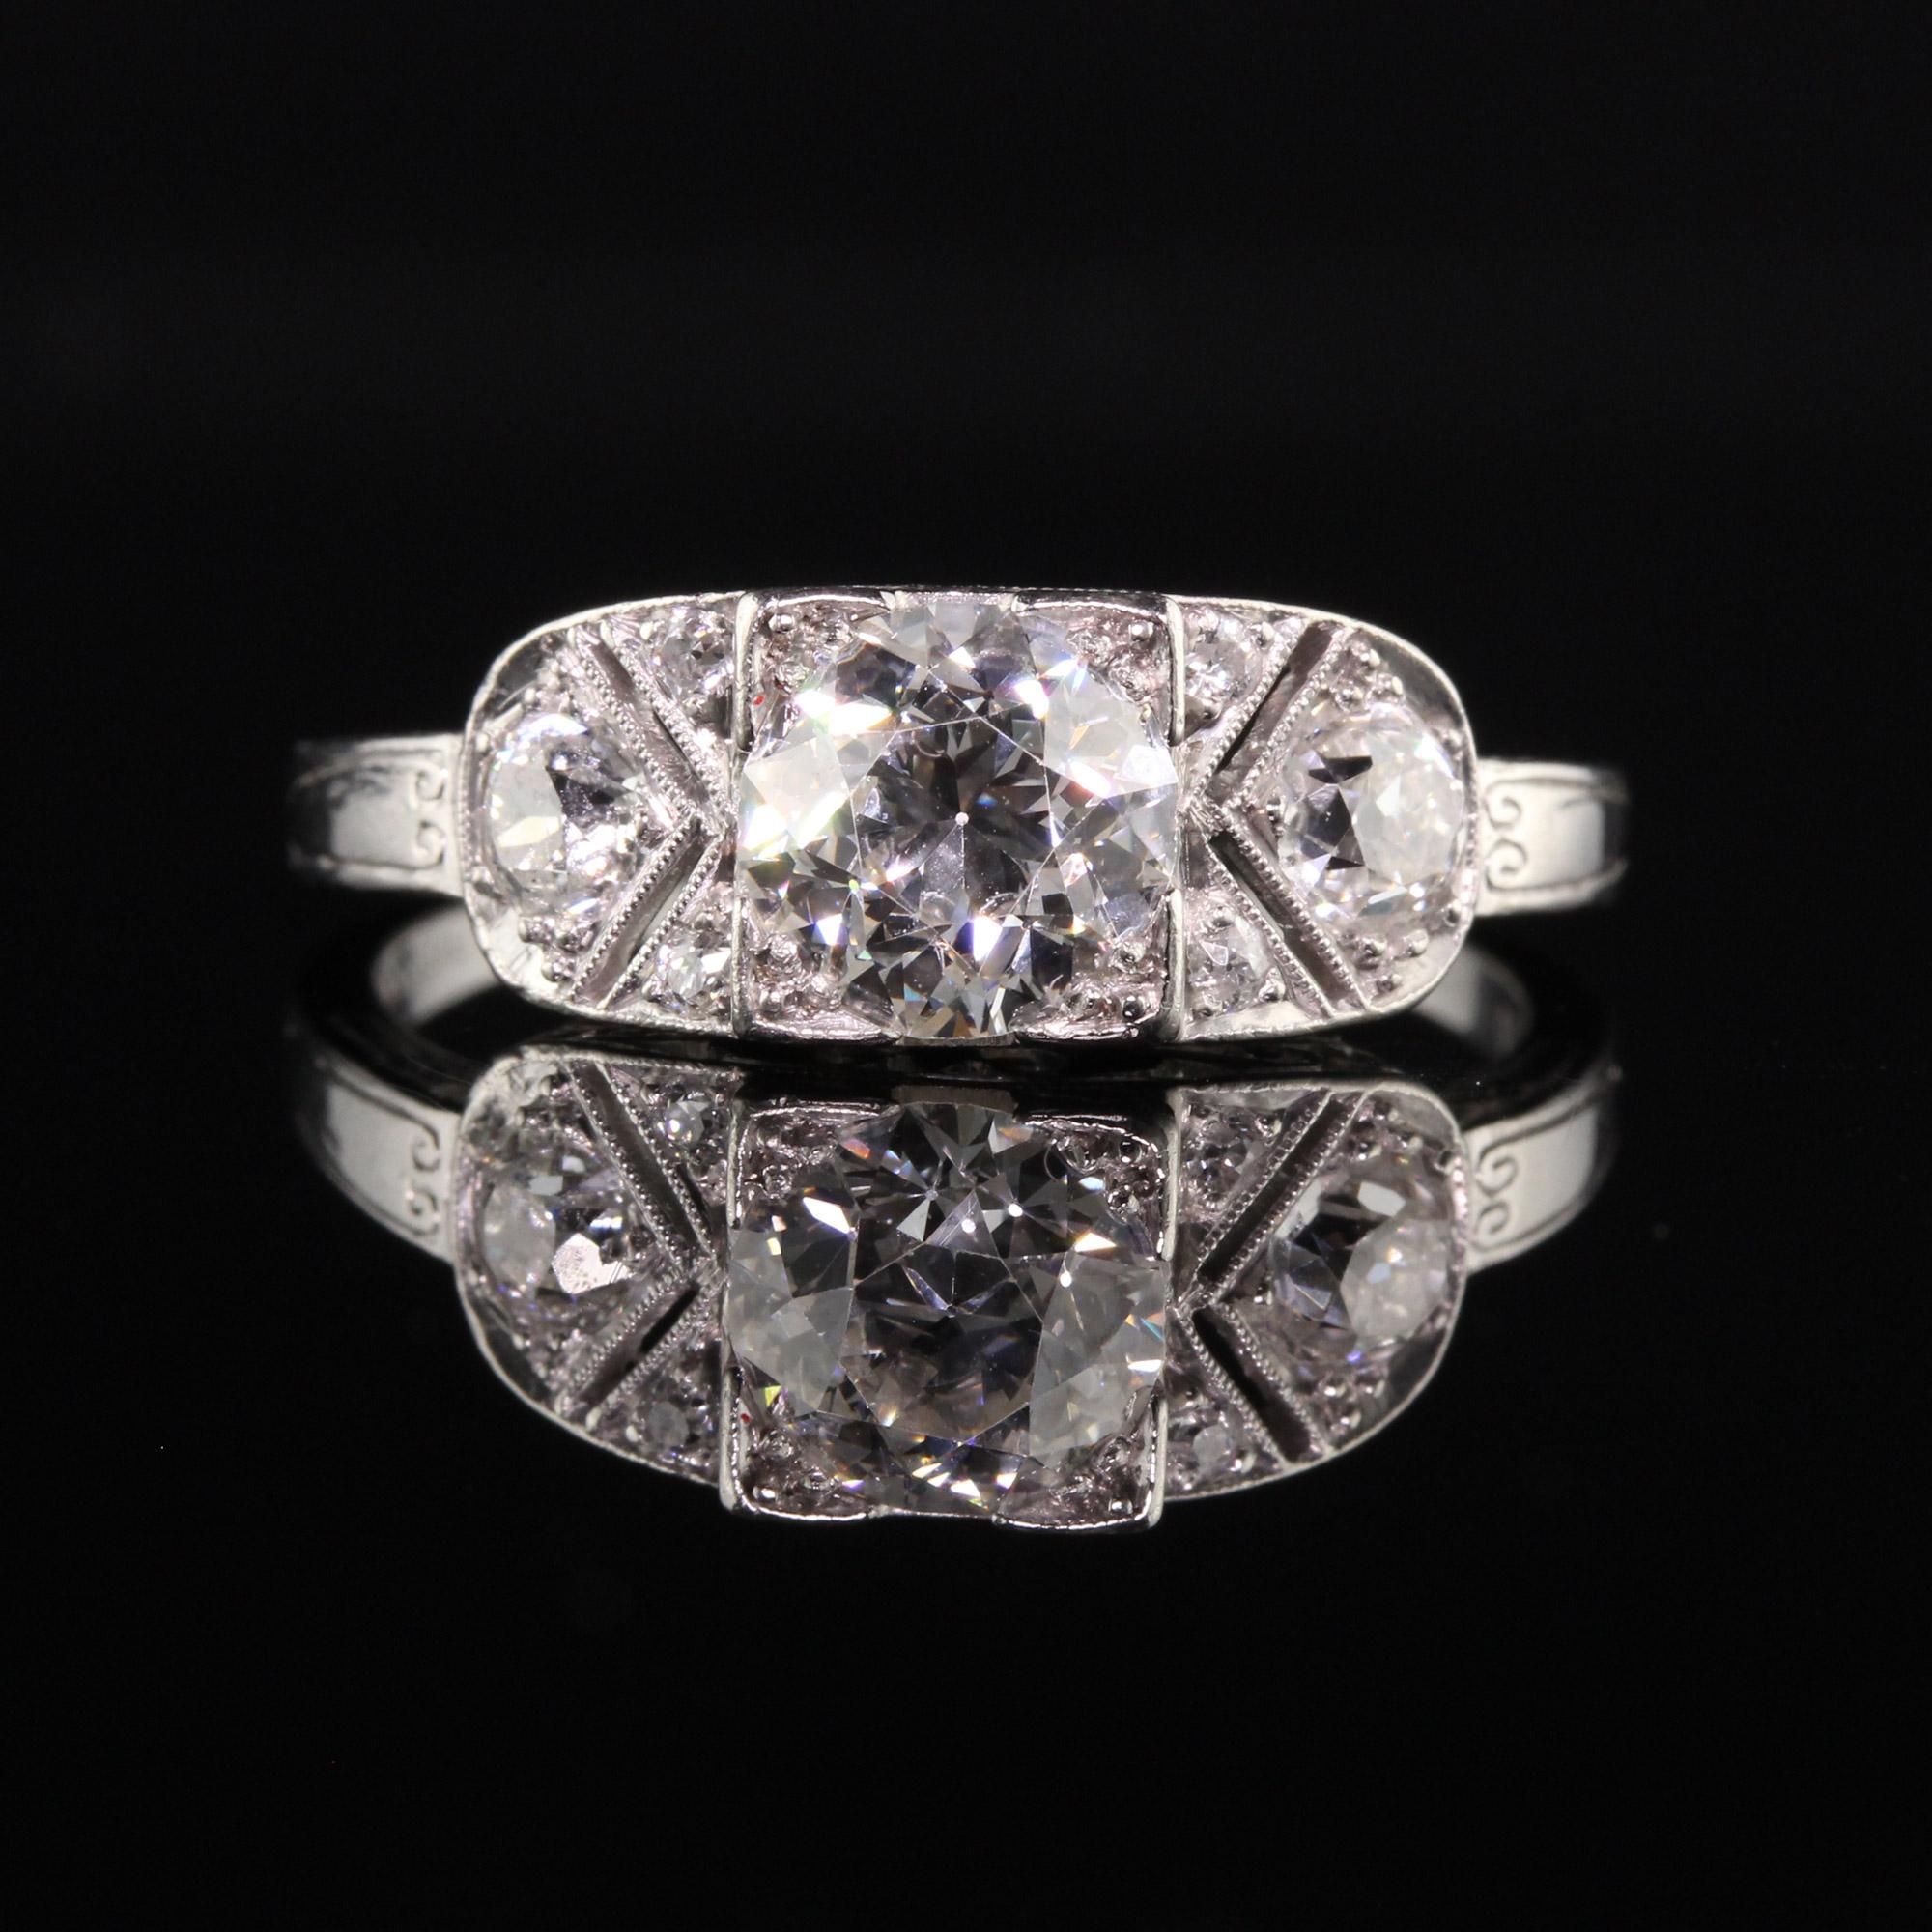 Antique Art Deco Platinum Hall Co Old European Diamond Engagement Ring In Good Condition For Sale In Great Neck, NY